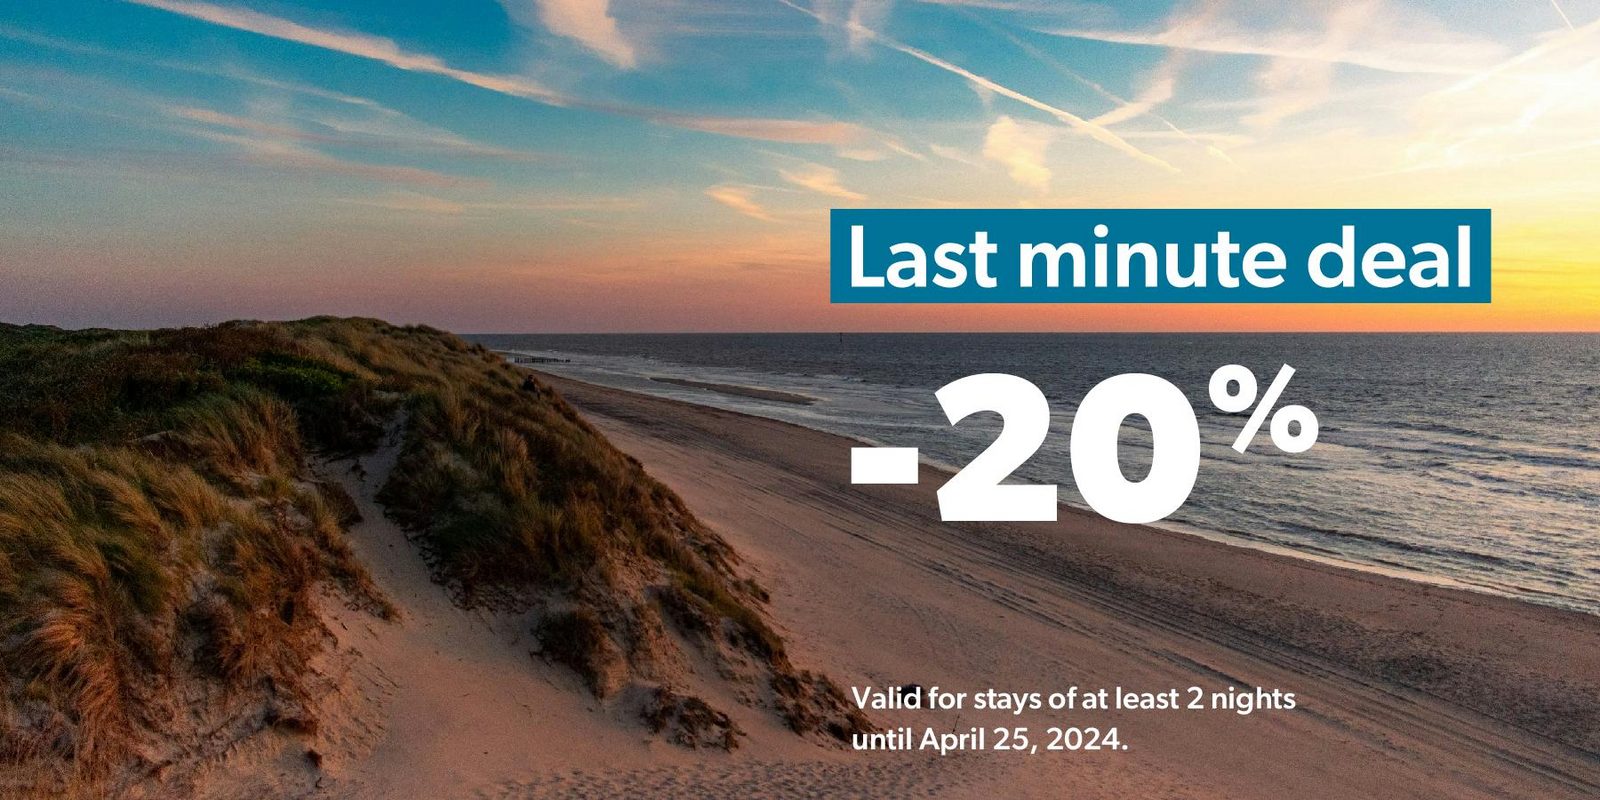 Last minute deal: 20% discount for stays of at least 2 nights, valid until April 30, 2024.